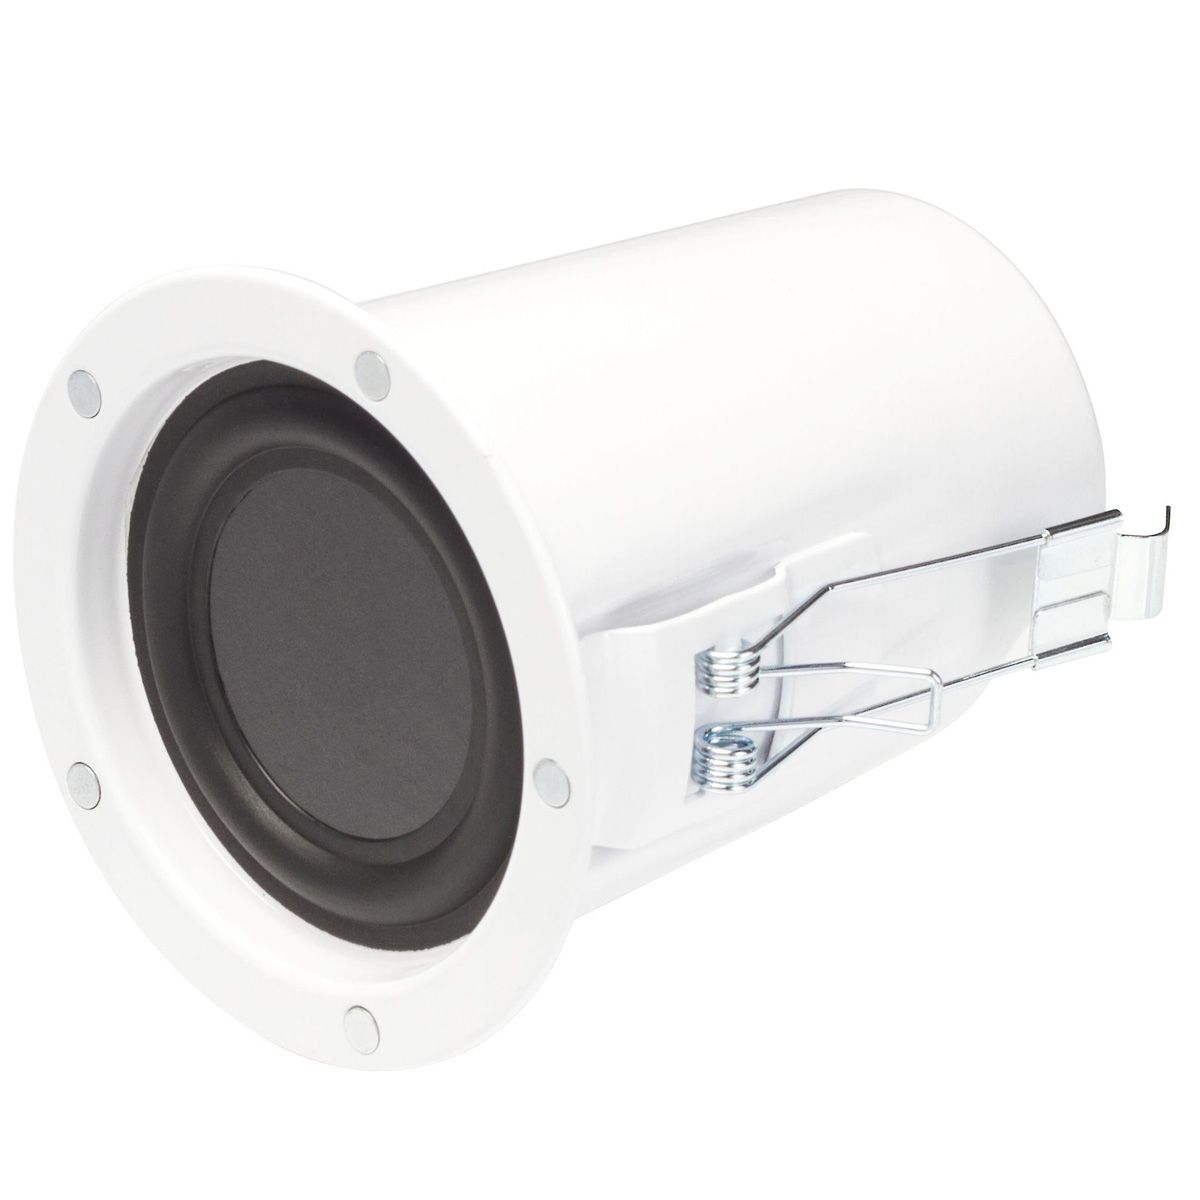 Cambridge Audio C46 Compact In-Ceiling Speaker without grill